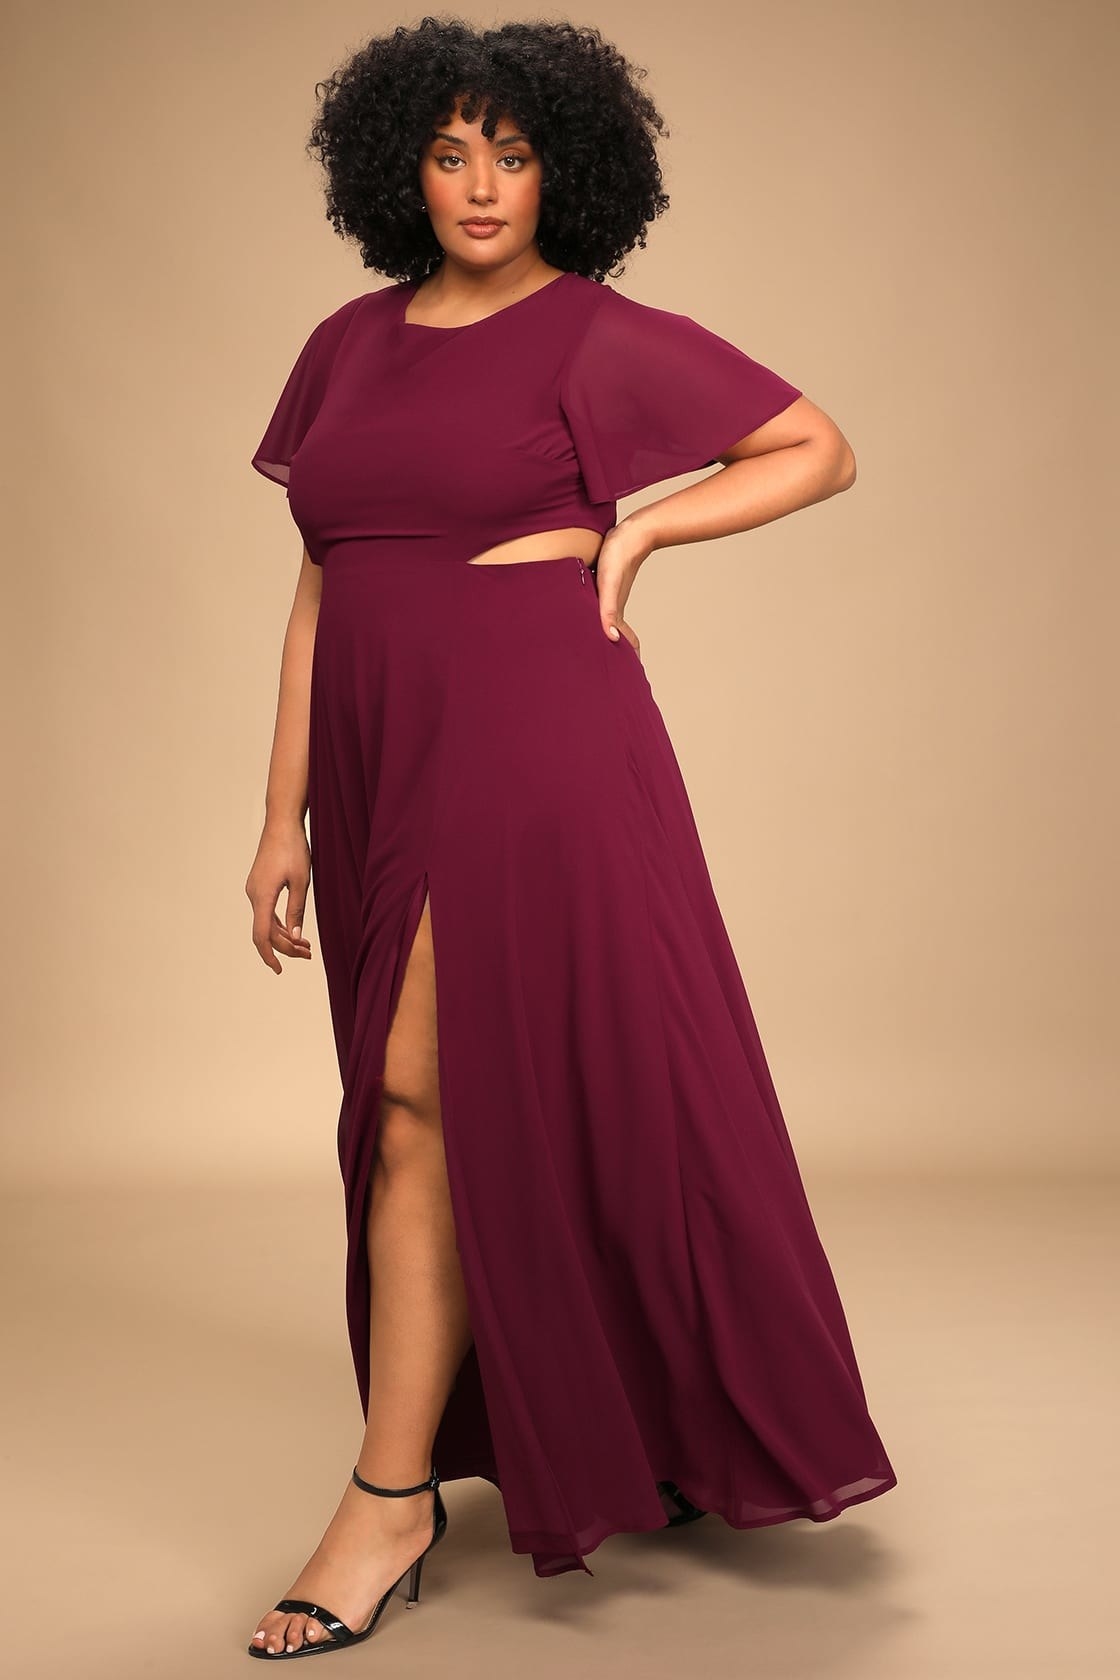 model in burgundy maxi dress with a slit, cutout across the back and sides, and fluttery sleeves